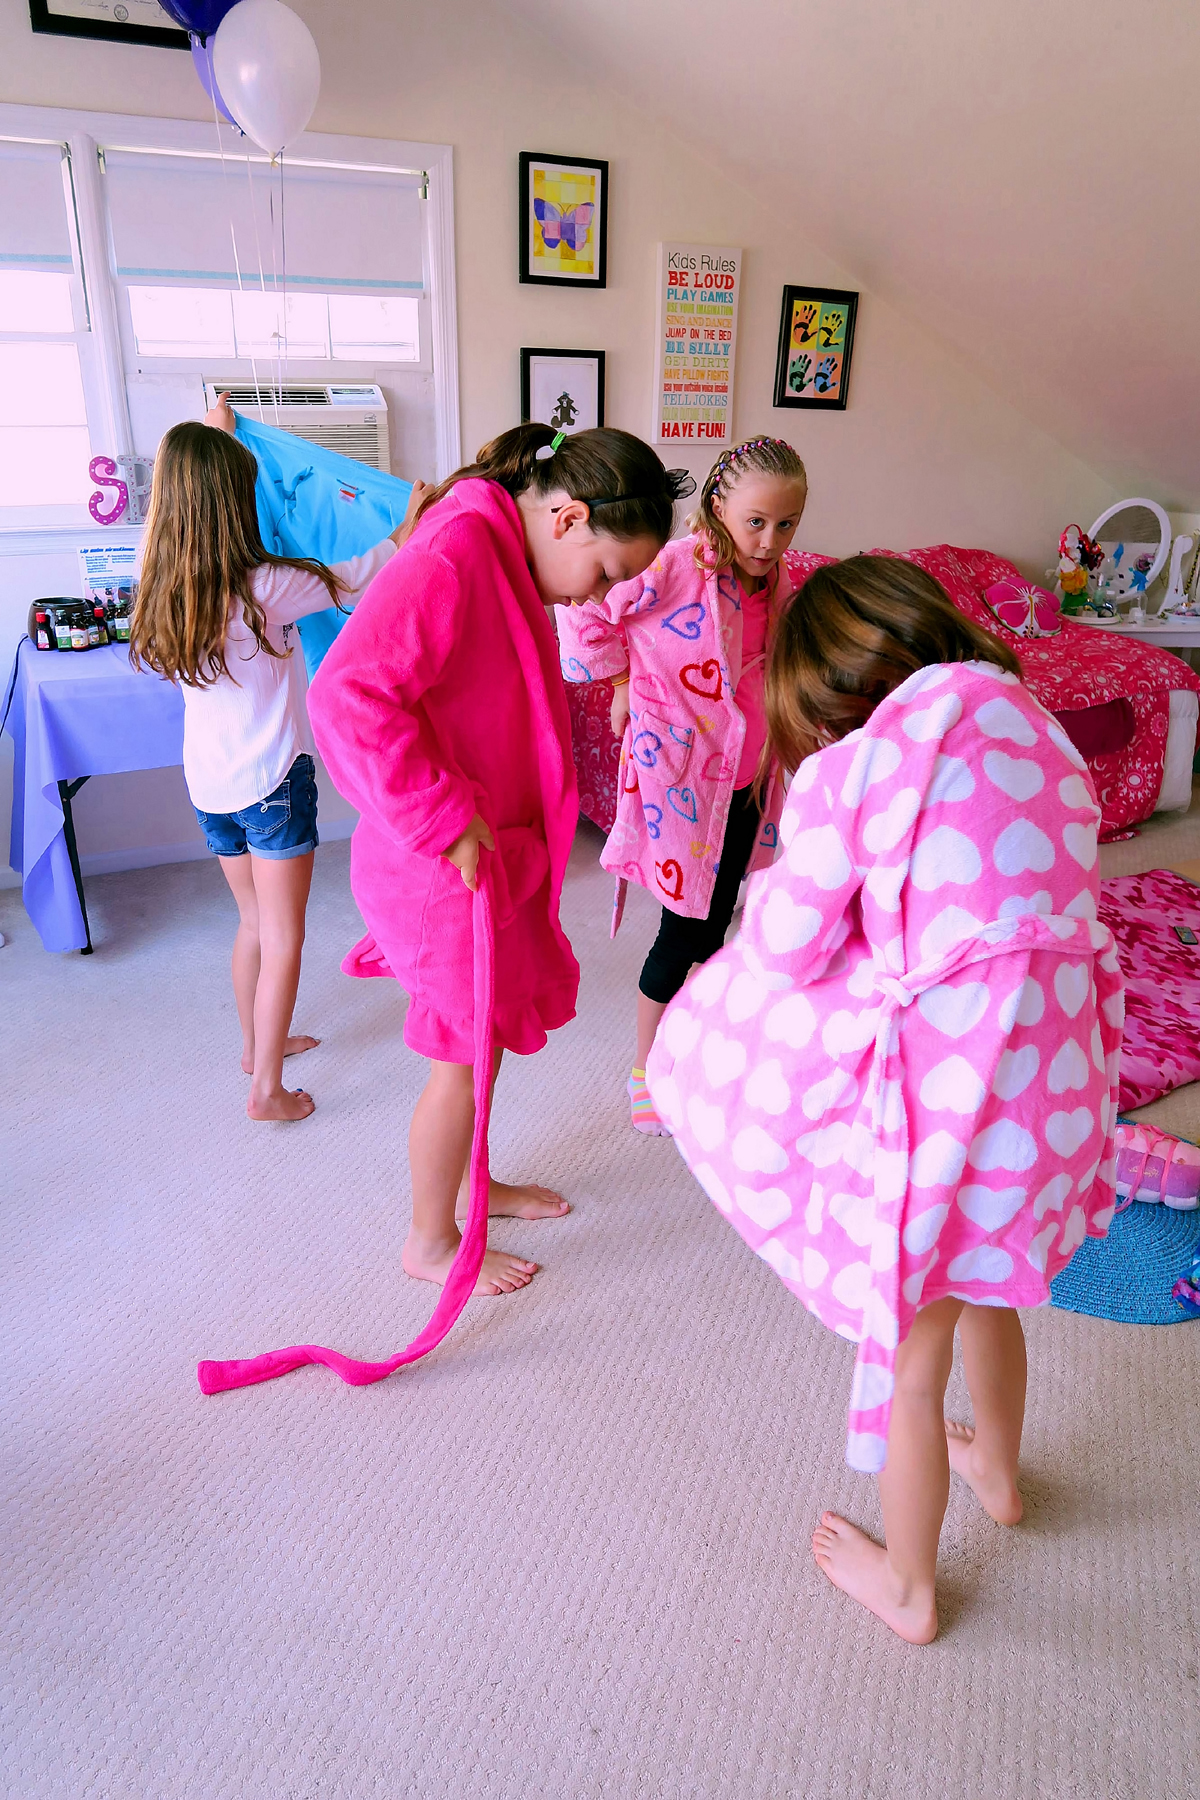 The Girls Putting On Their Robes. 